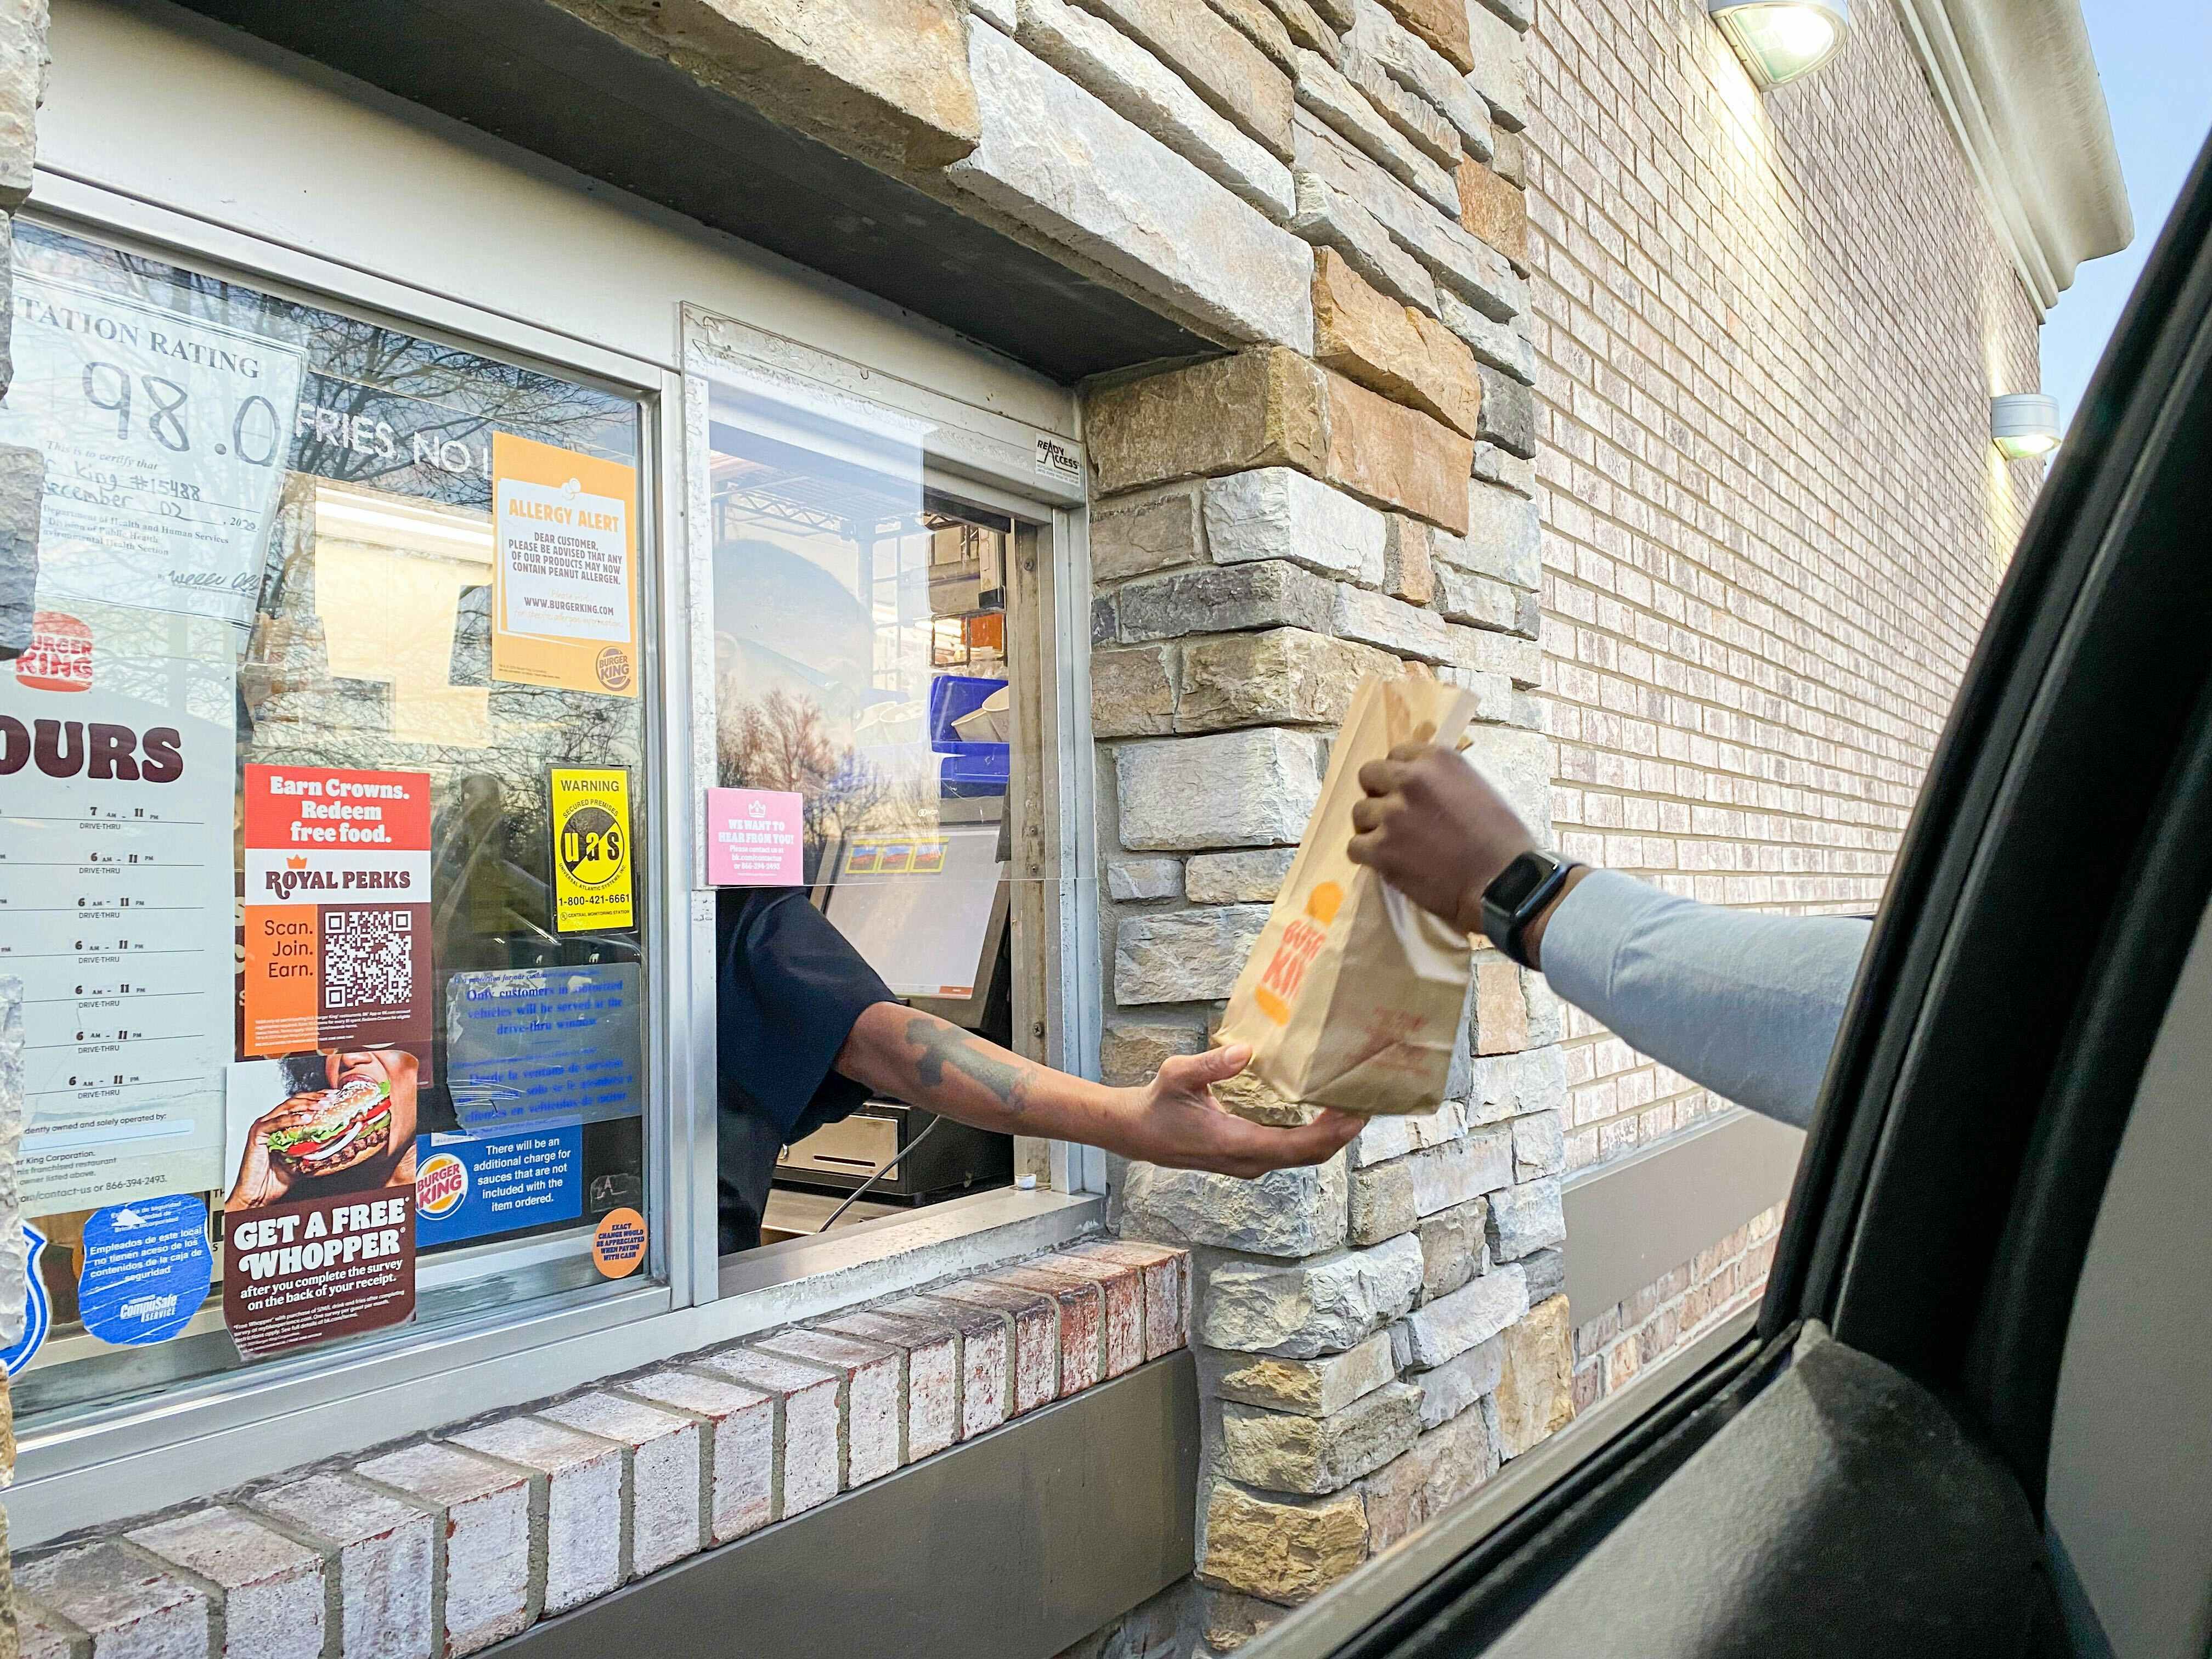 a person grabing burget king out of the drive thru window 